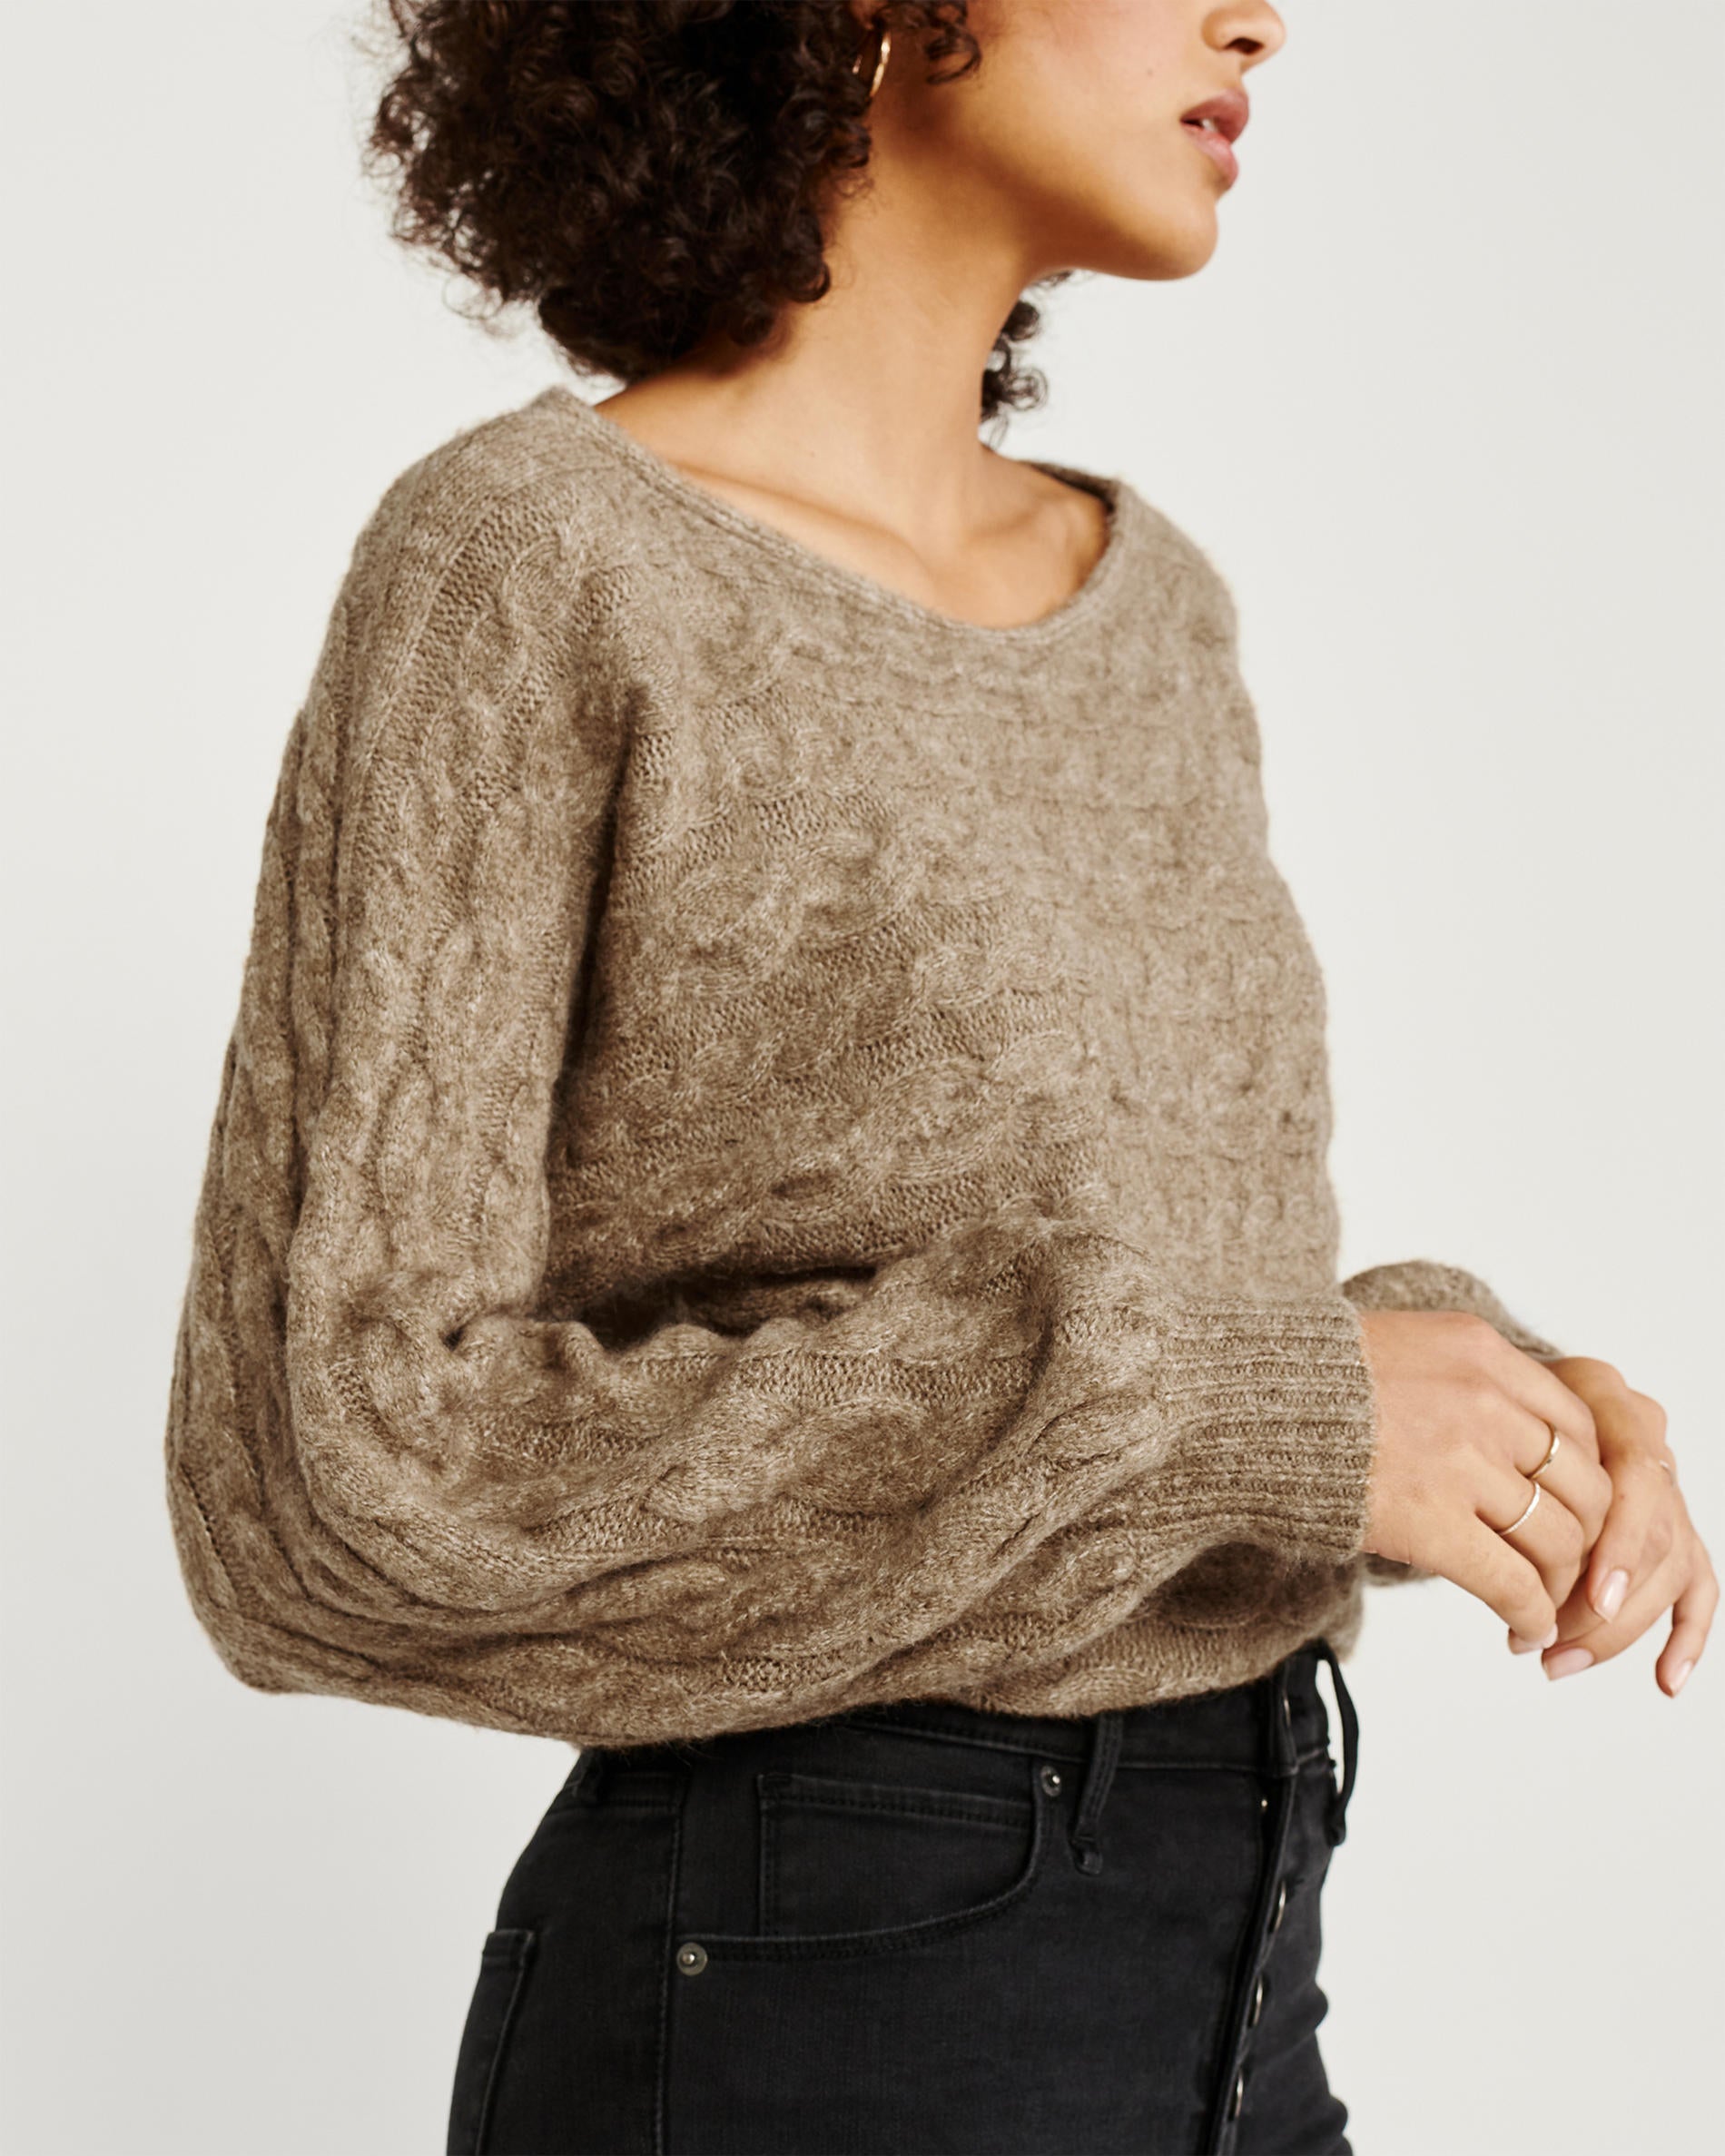 Abercrombie & Fitch Cable Knit Dolman Sweater